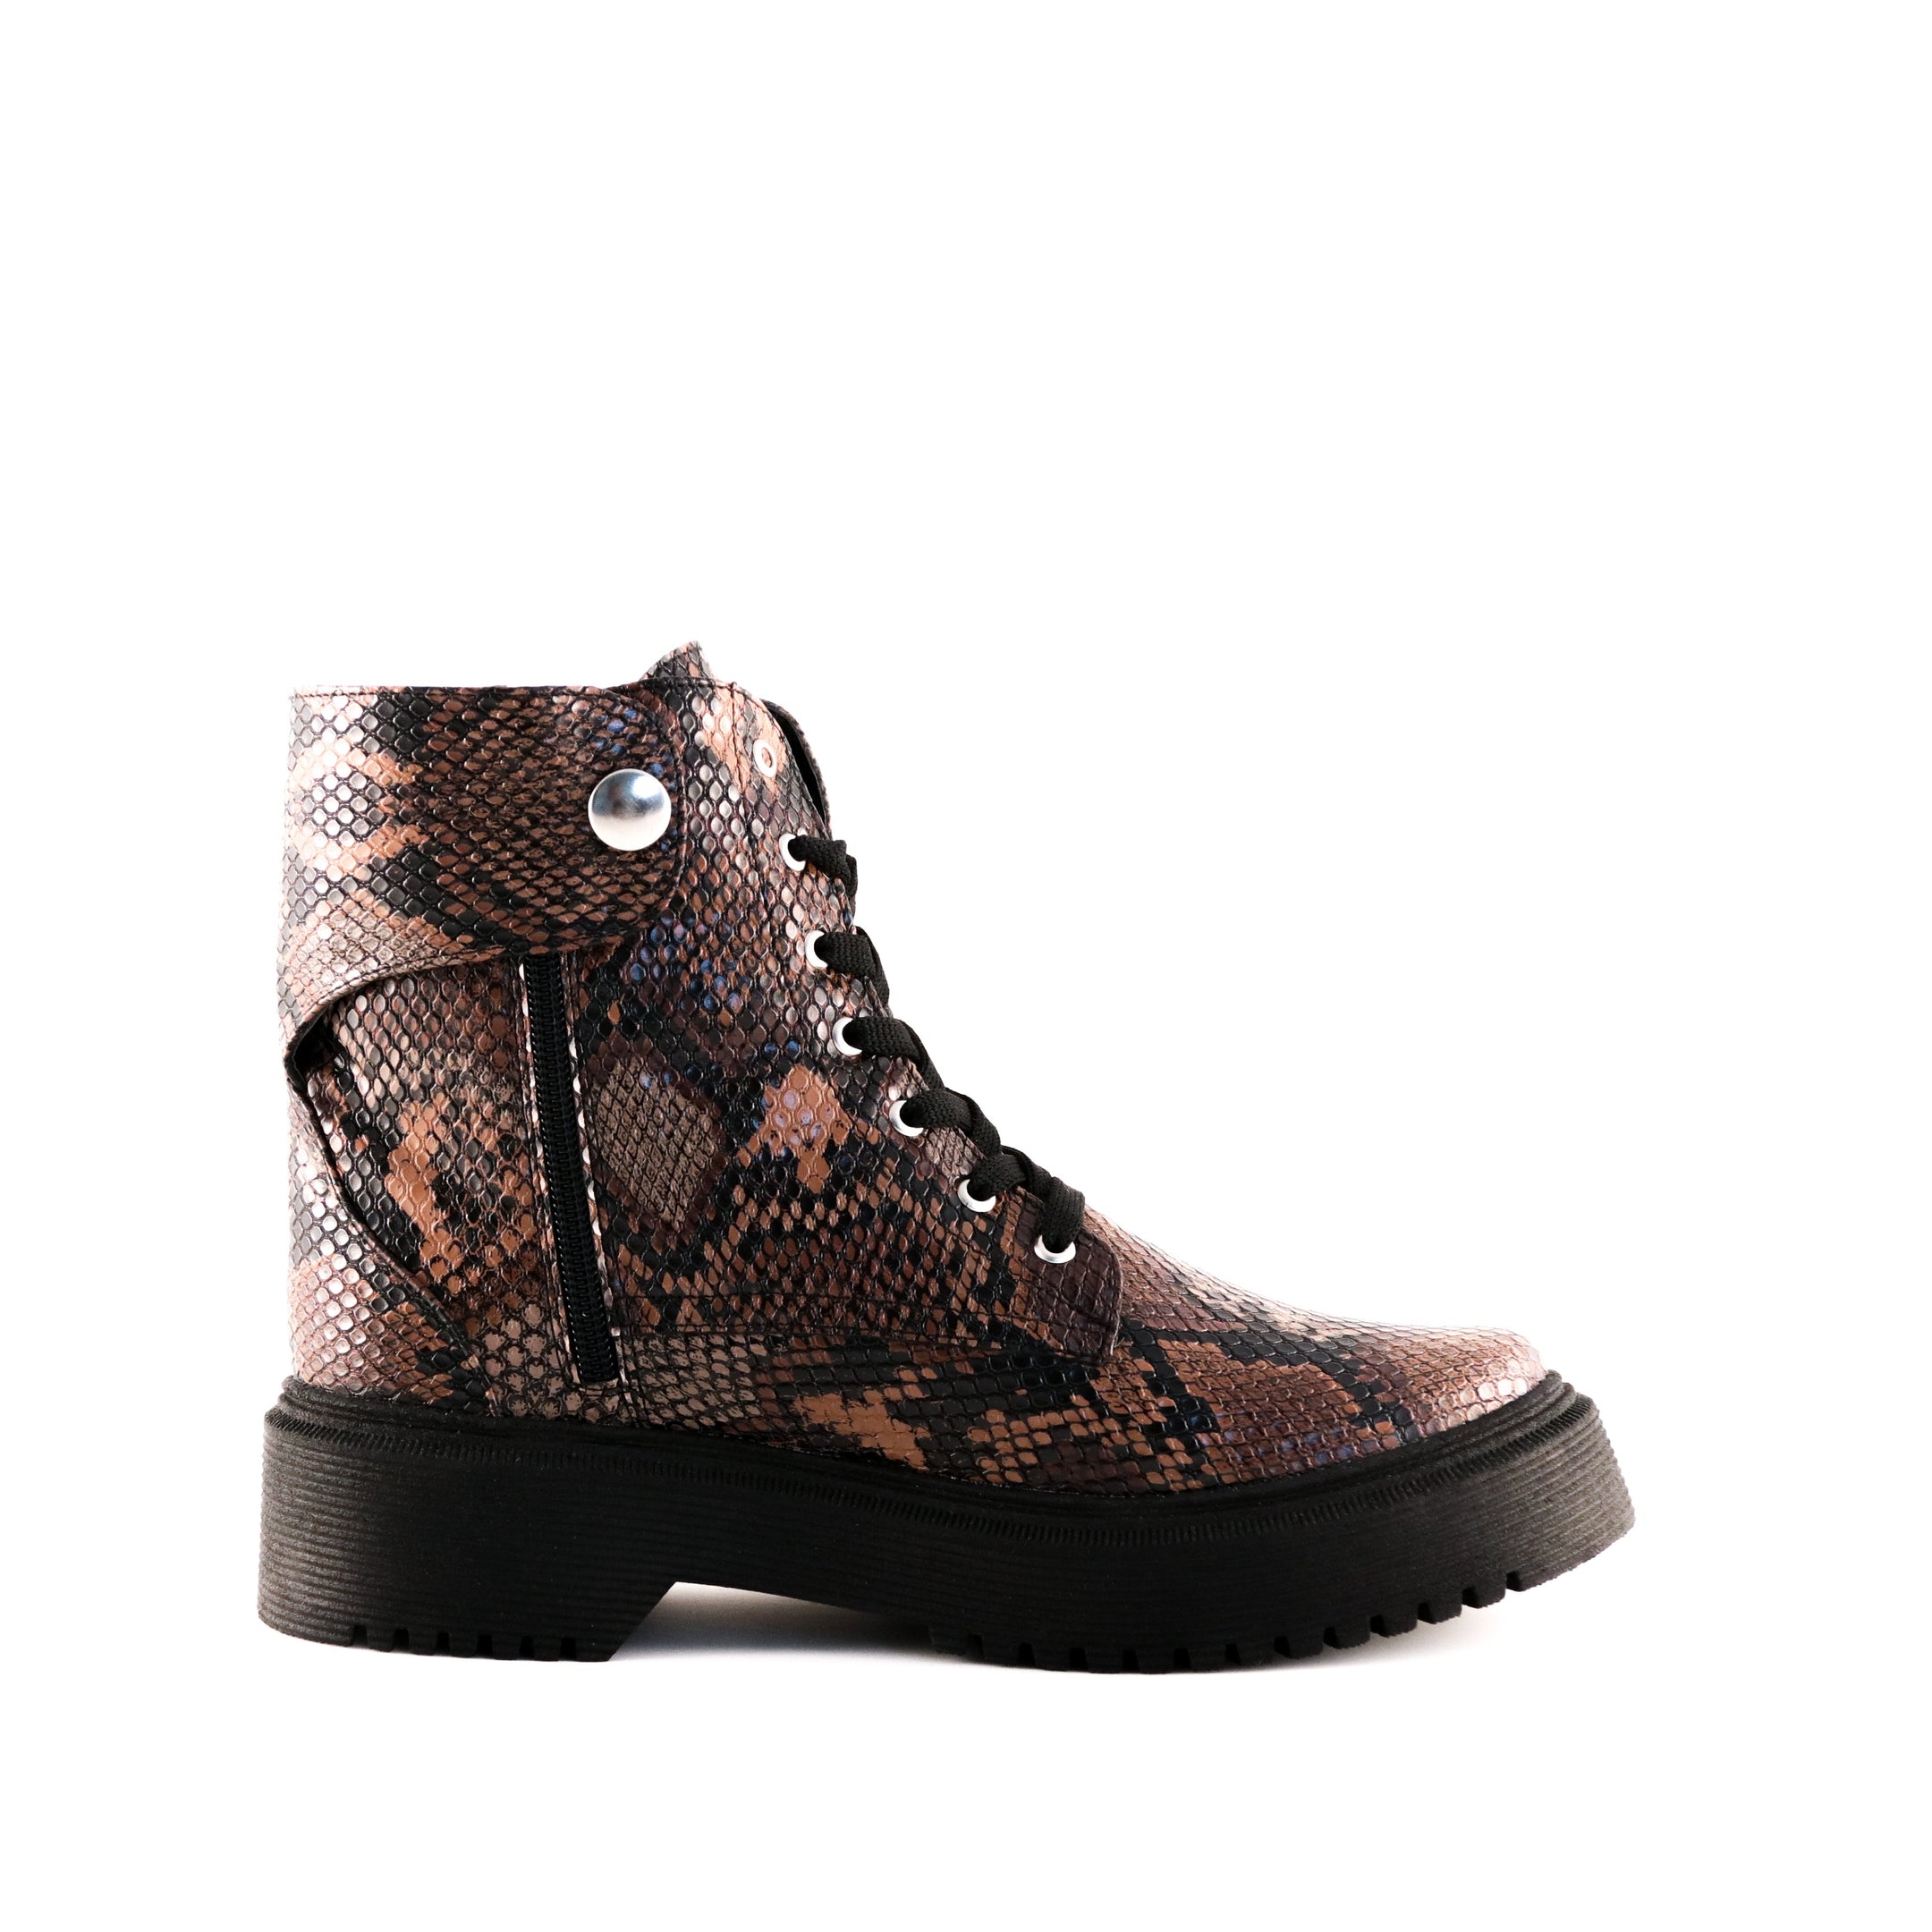 Buy Women's Runaway Combat Boots Brown Snake by Nest Shoes